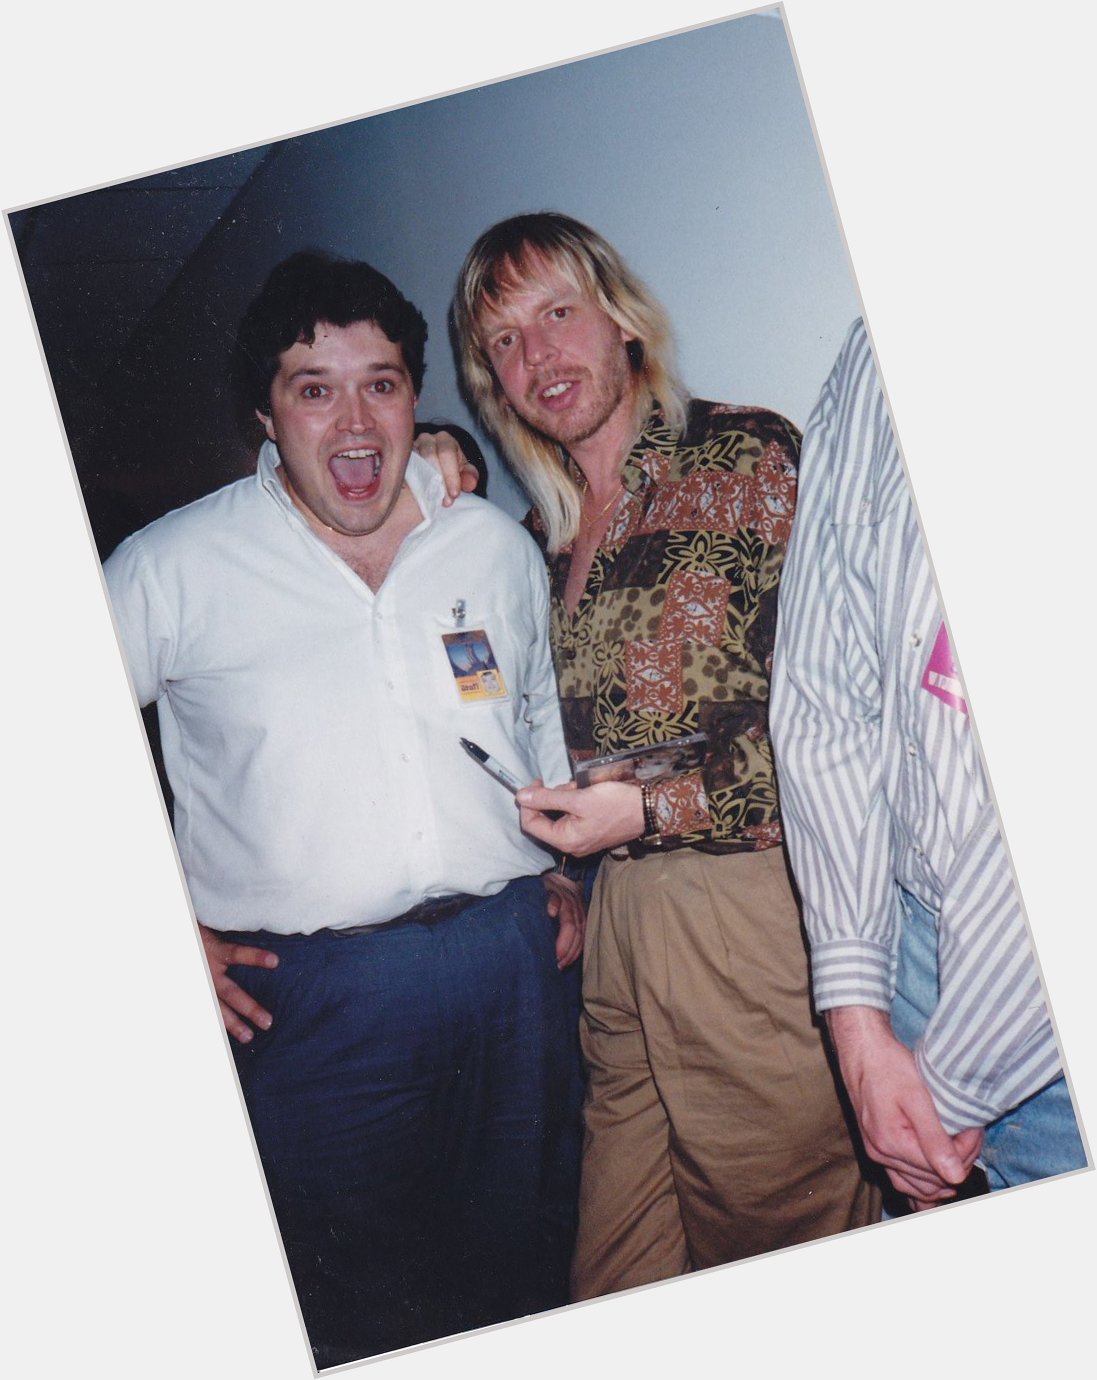 Throwback Thursday Photo and Happy Belated Birthday to Rick Wakeman from Yes   